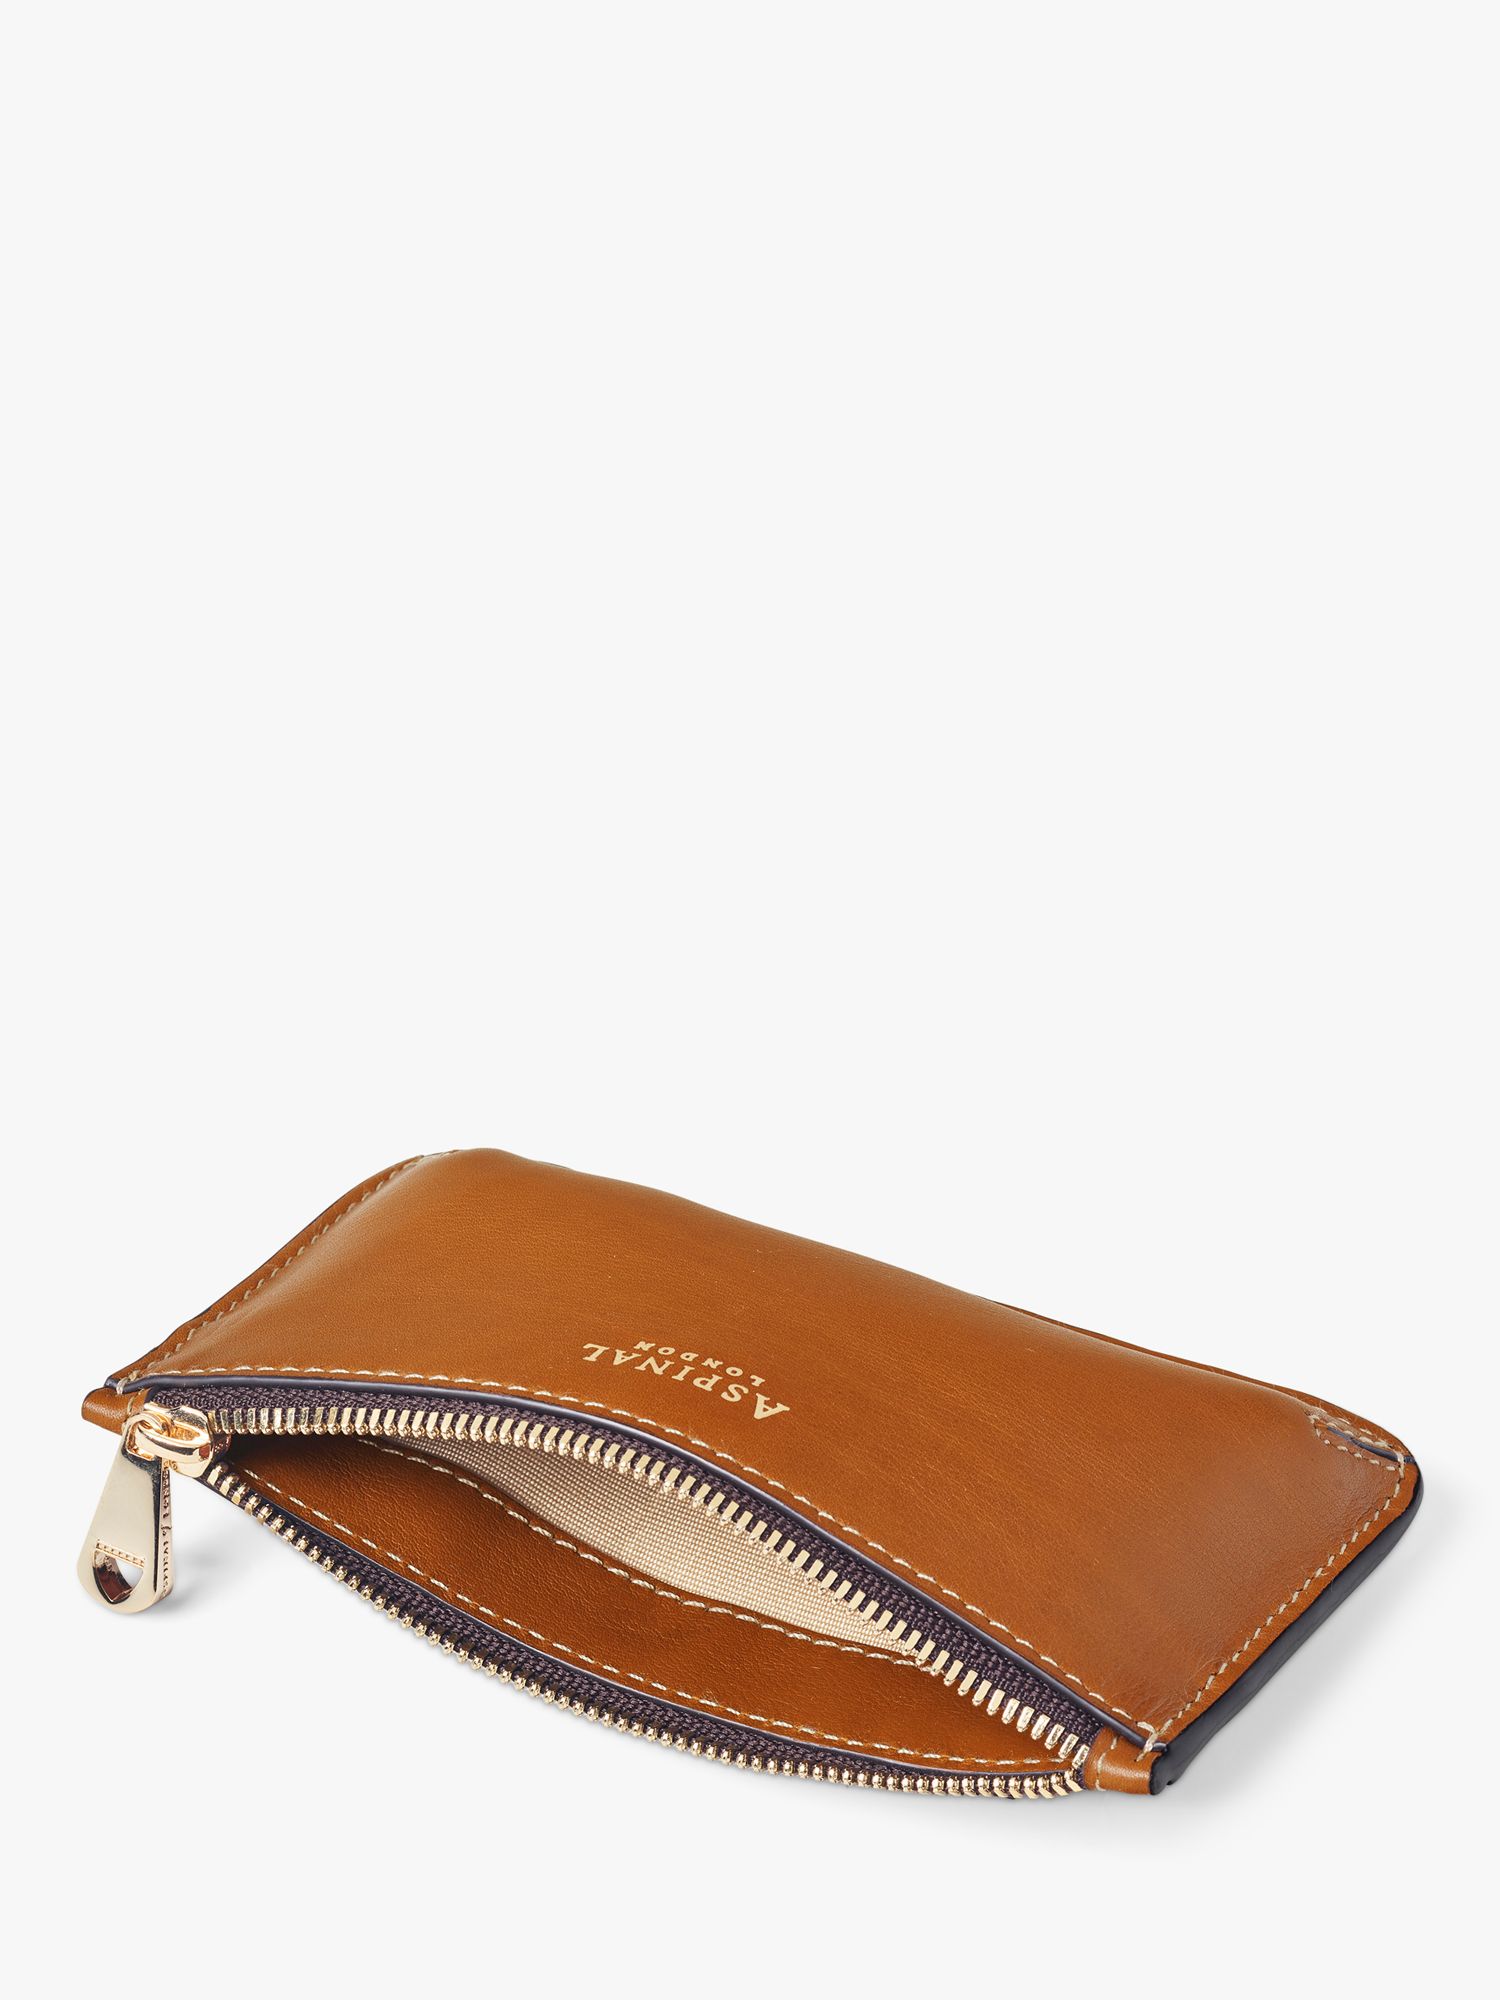 Aspinal of London Ella Leather Card and Coin Holder, Tan